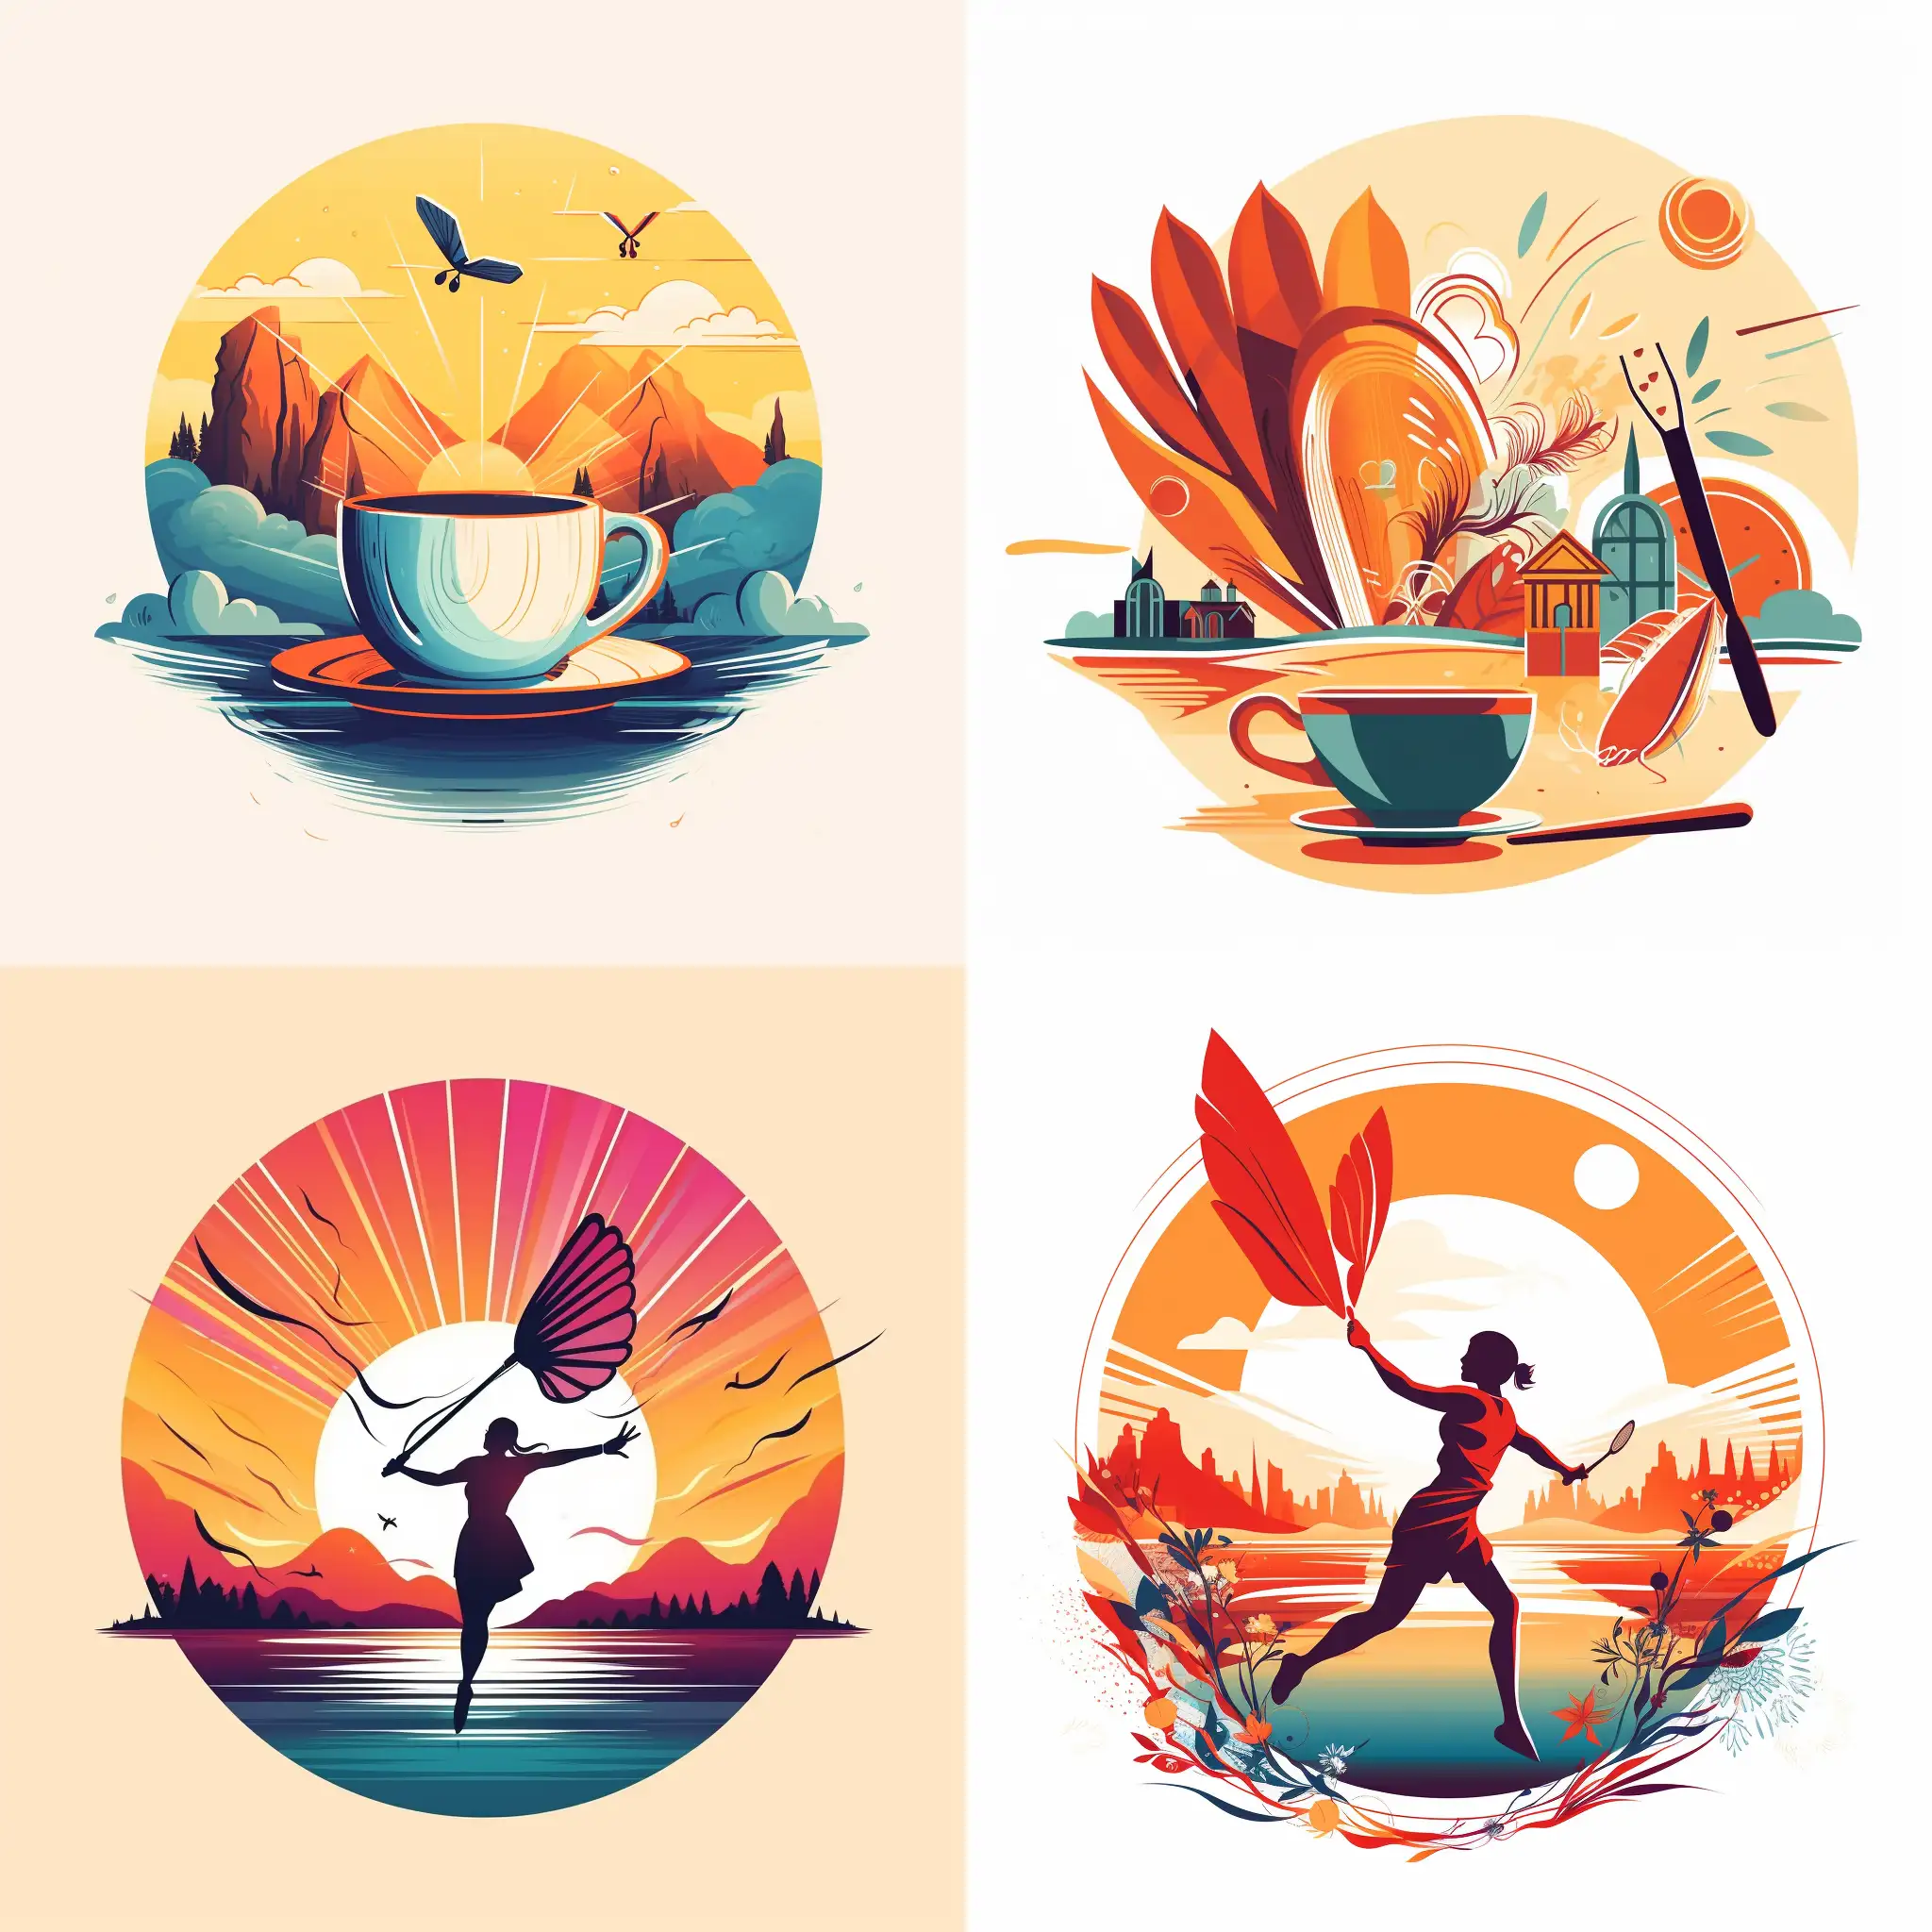 Badminton game, logo, morning cup, simple, warm and bright colors, enthusiastic and positive